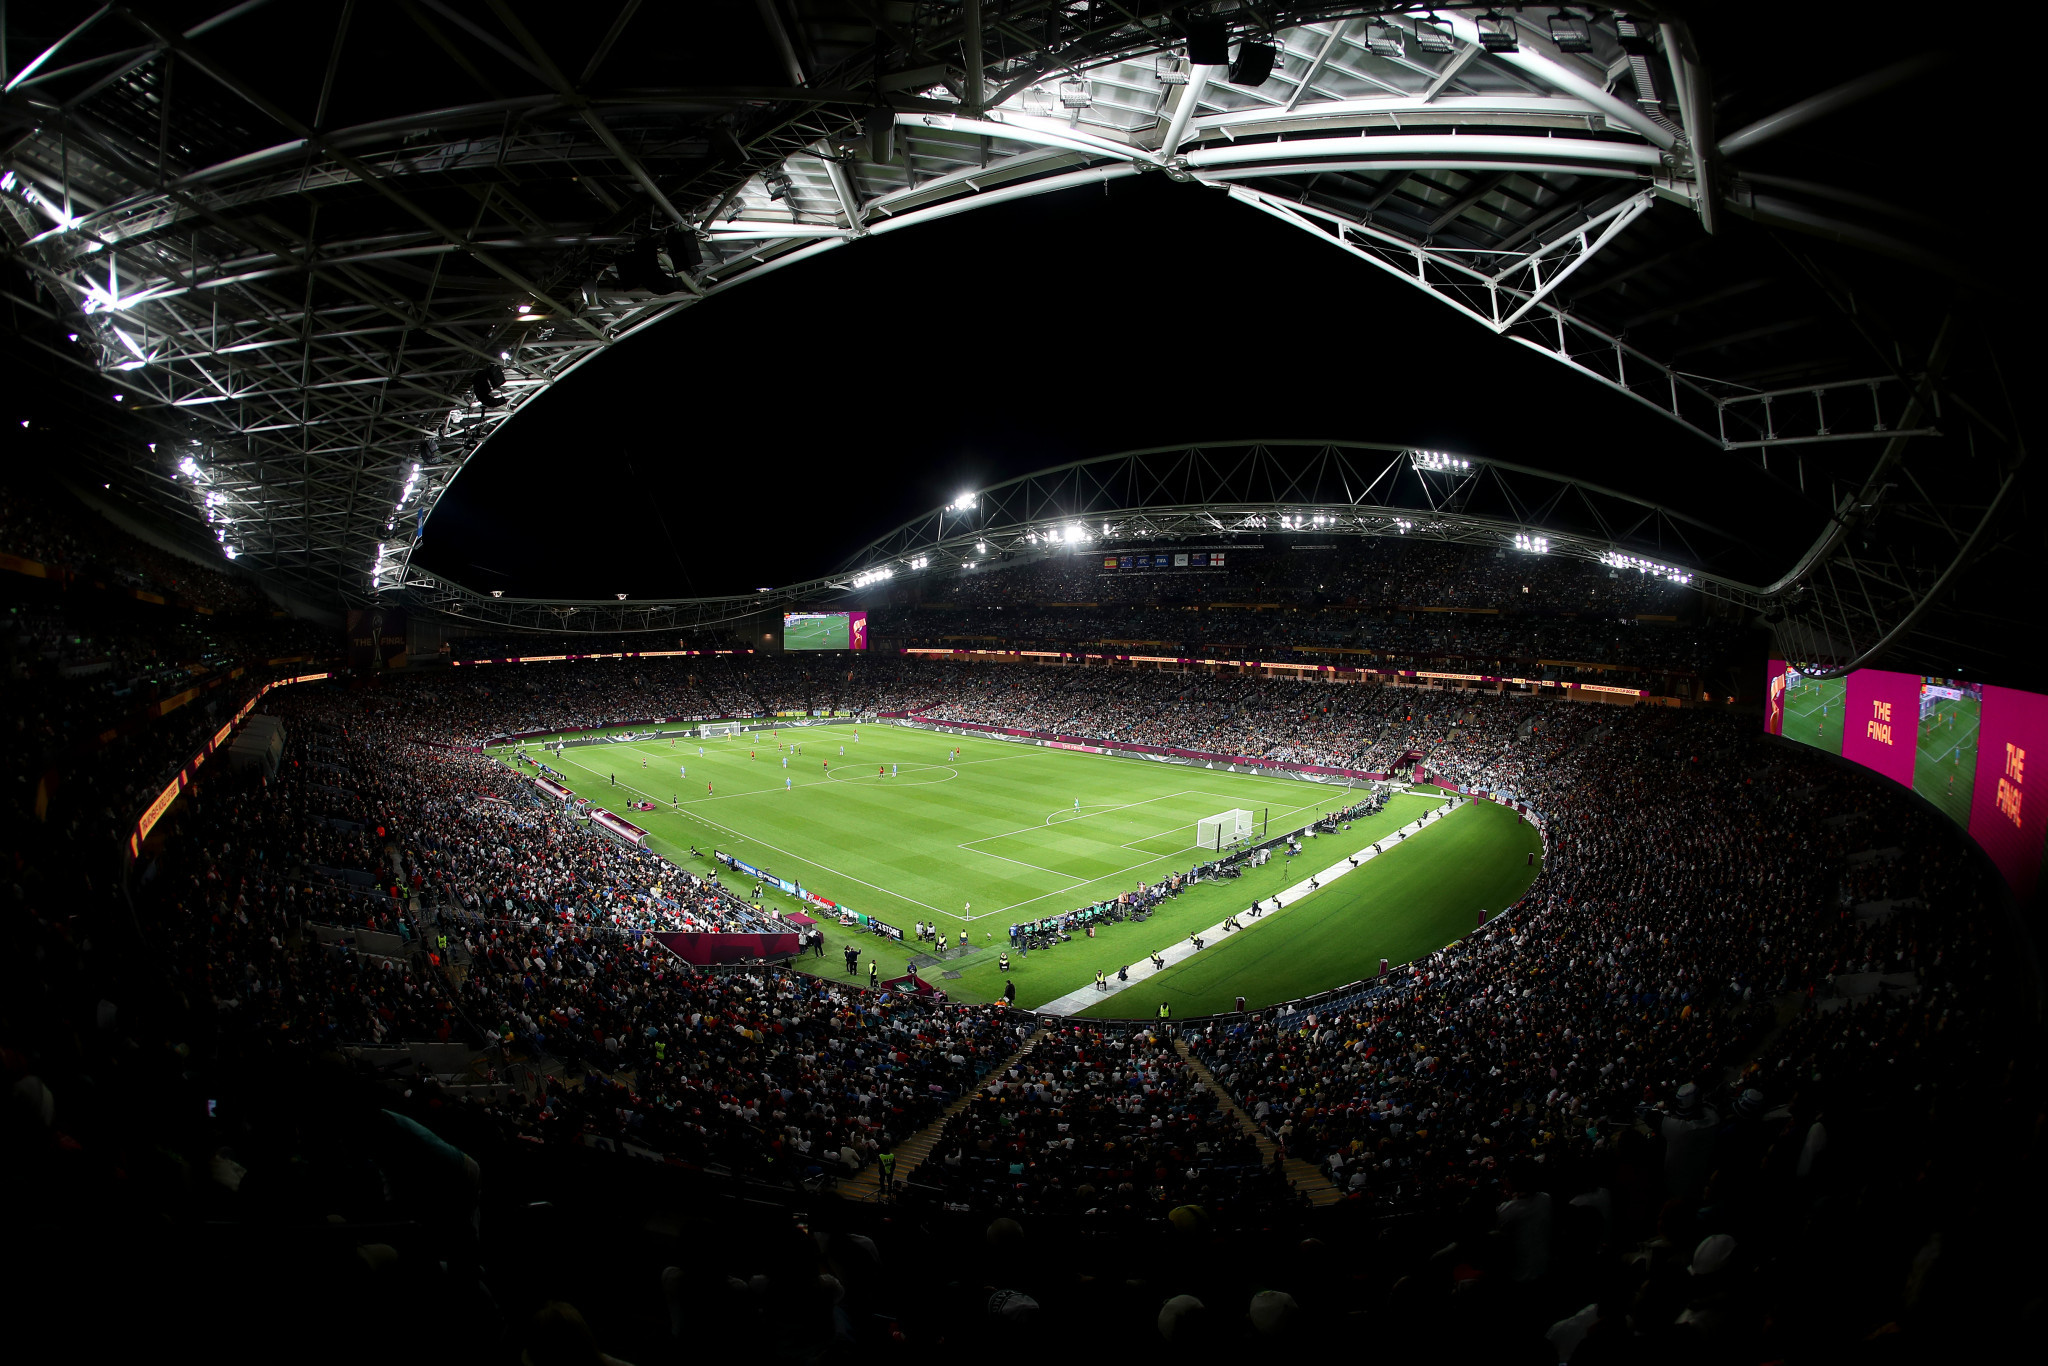 Australia falls short of required stadiums for 2034 FIFA World Cup bid